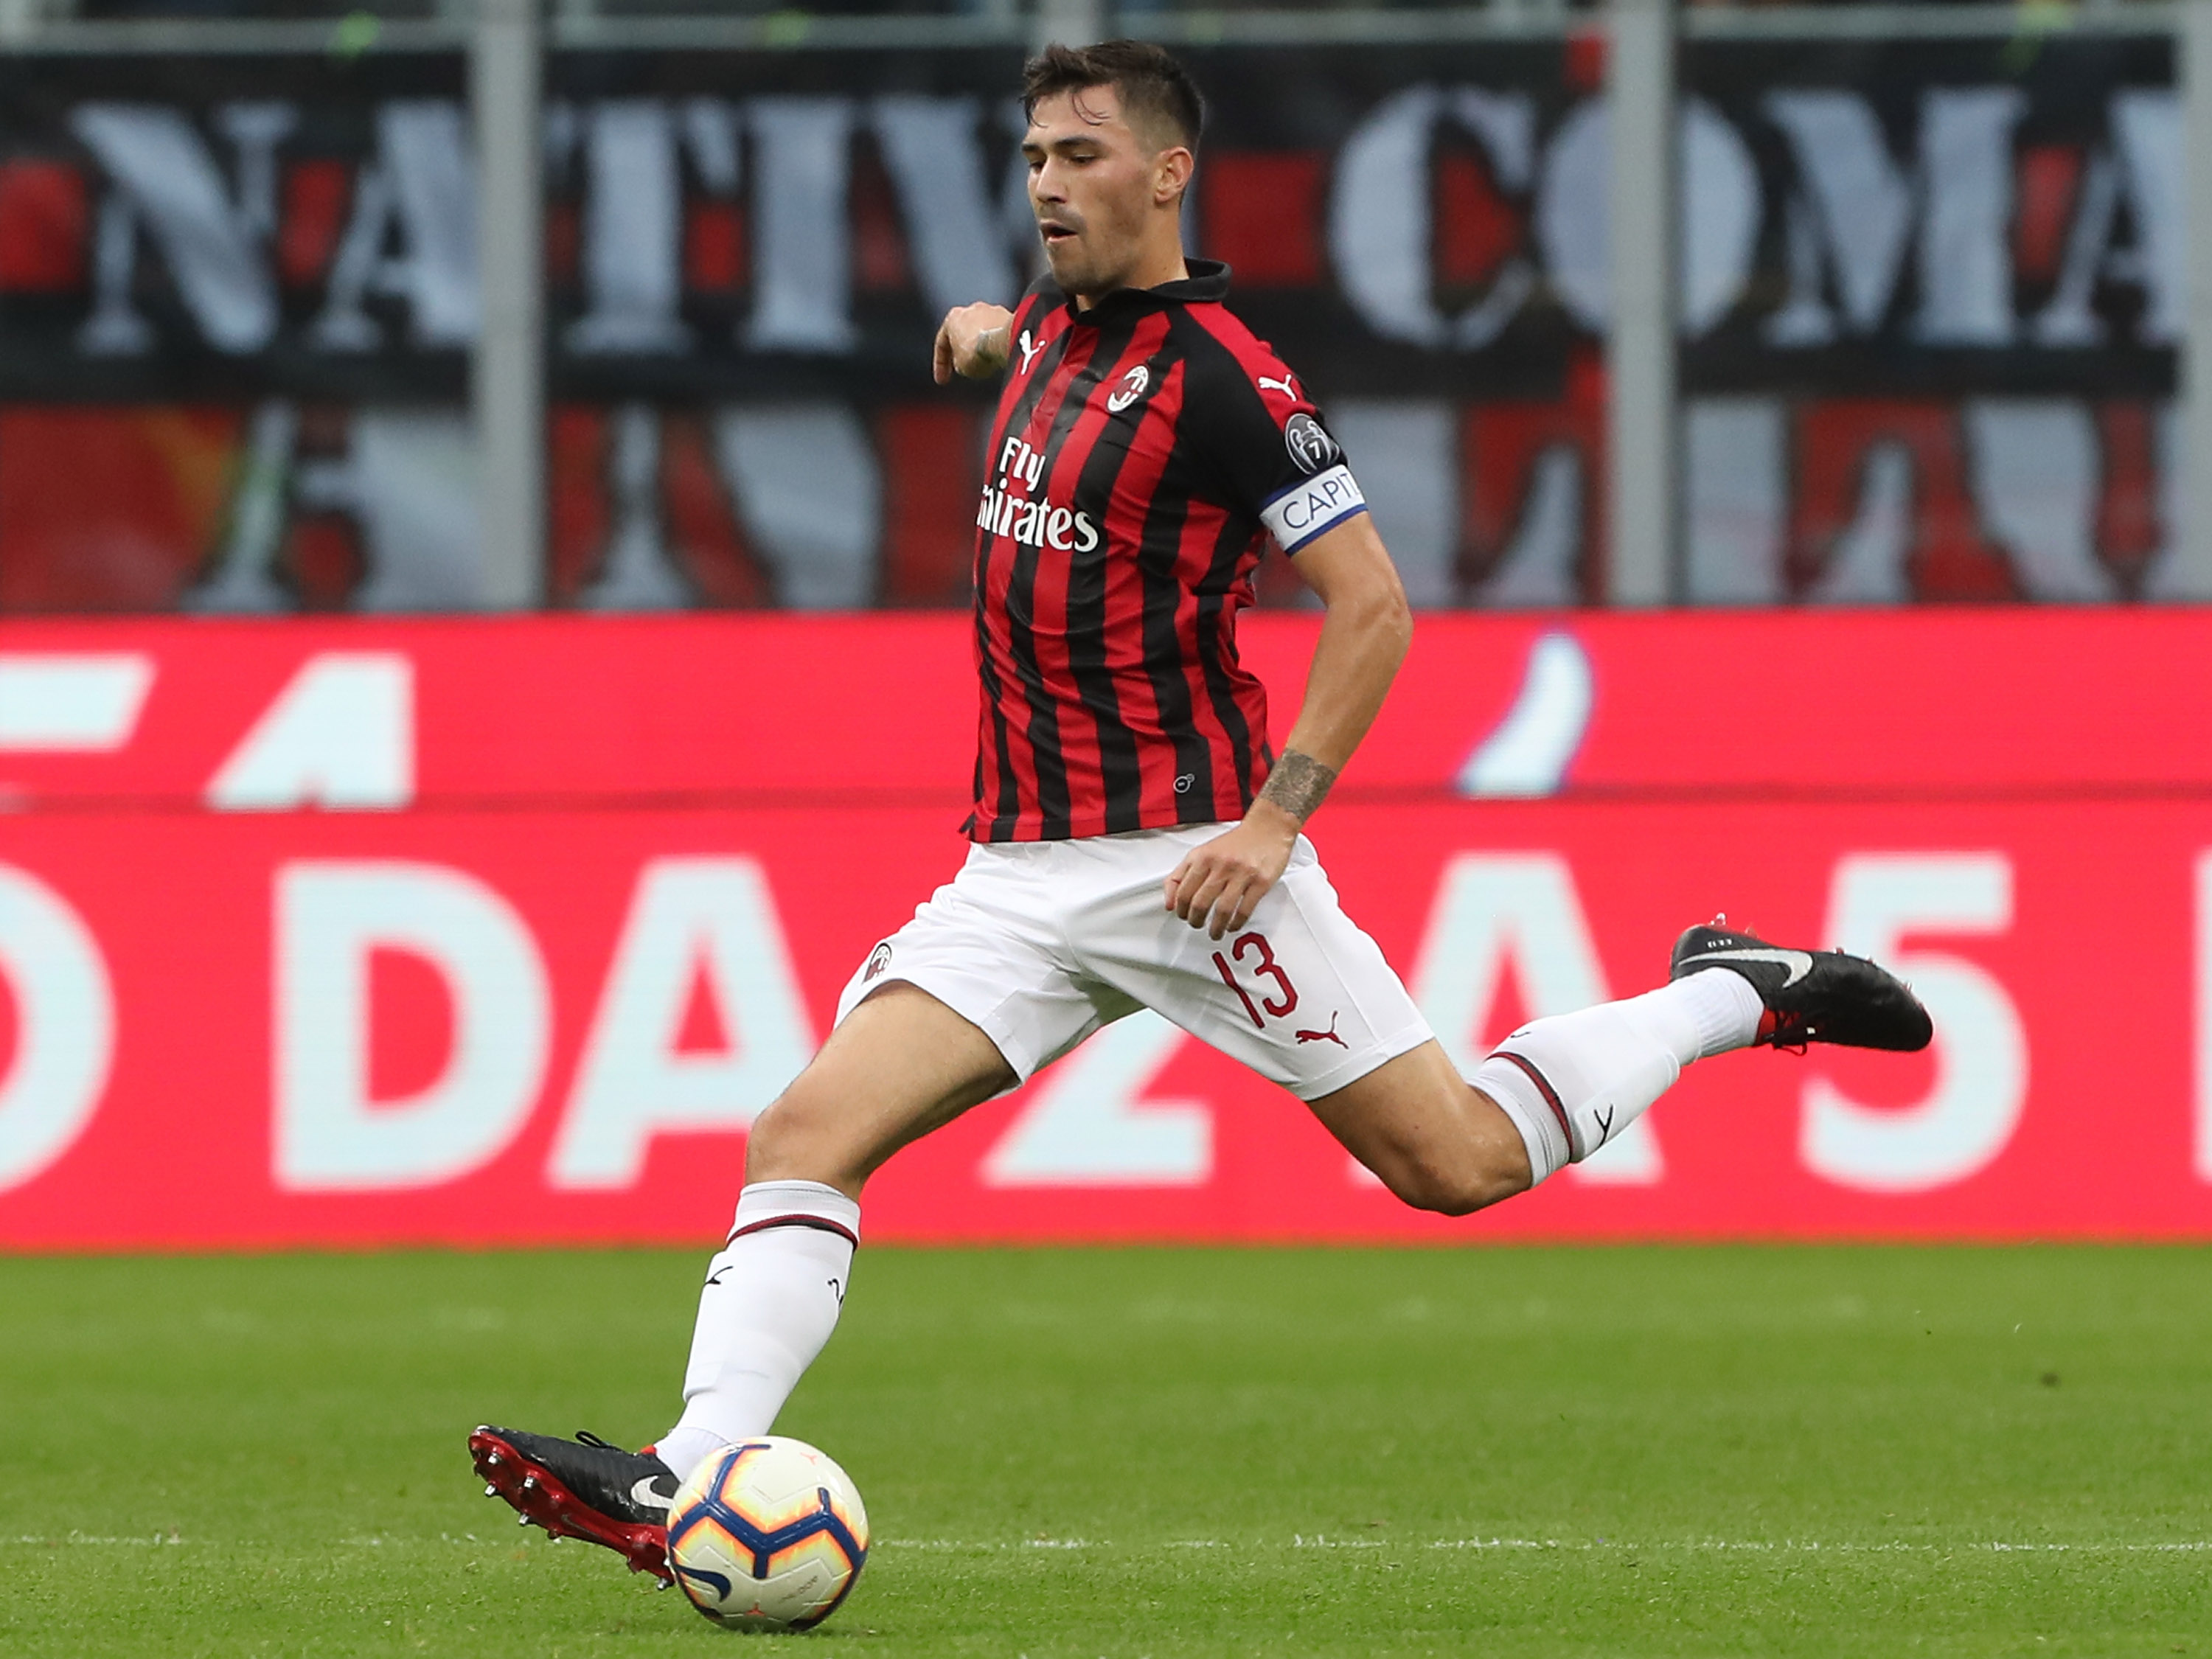 MILAN, ITALY - SEPTEMBER 23:  Alessio Romagnoli of AC Milan in action during the serie A match between AC Milan and Atalanta BC at Stadio Giuseppe Meazza on September 23, 2018 in Milan, Italy.  (Photo by Marco Luzzani/Getty Images)